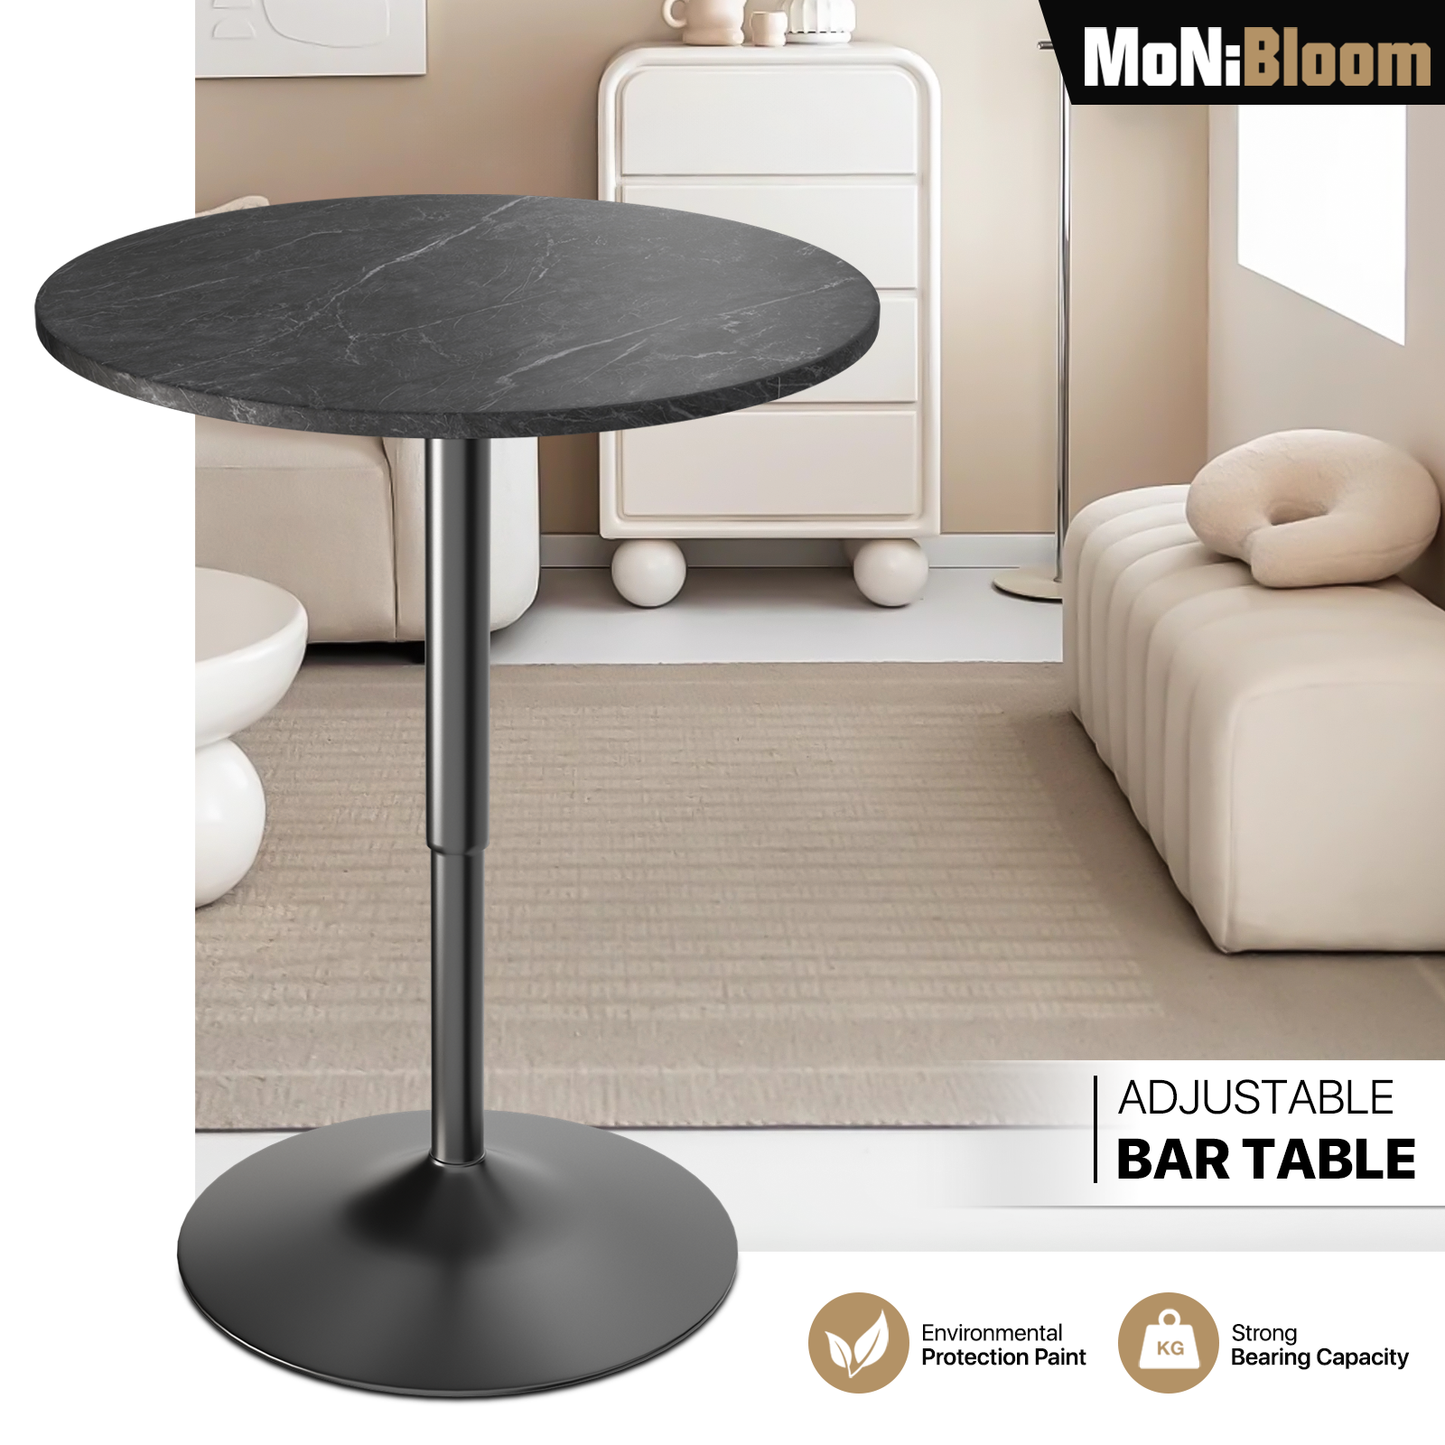 Adjustable Height Bar Table - 27.5" to 35"